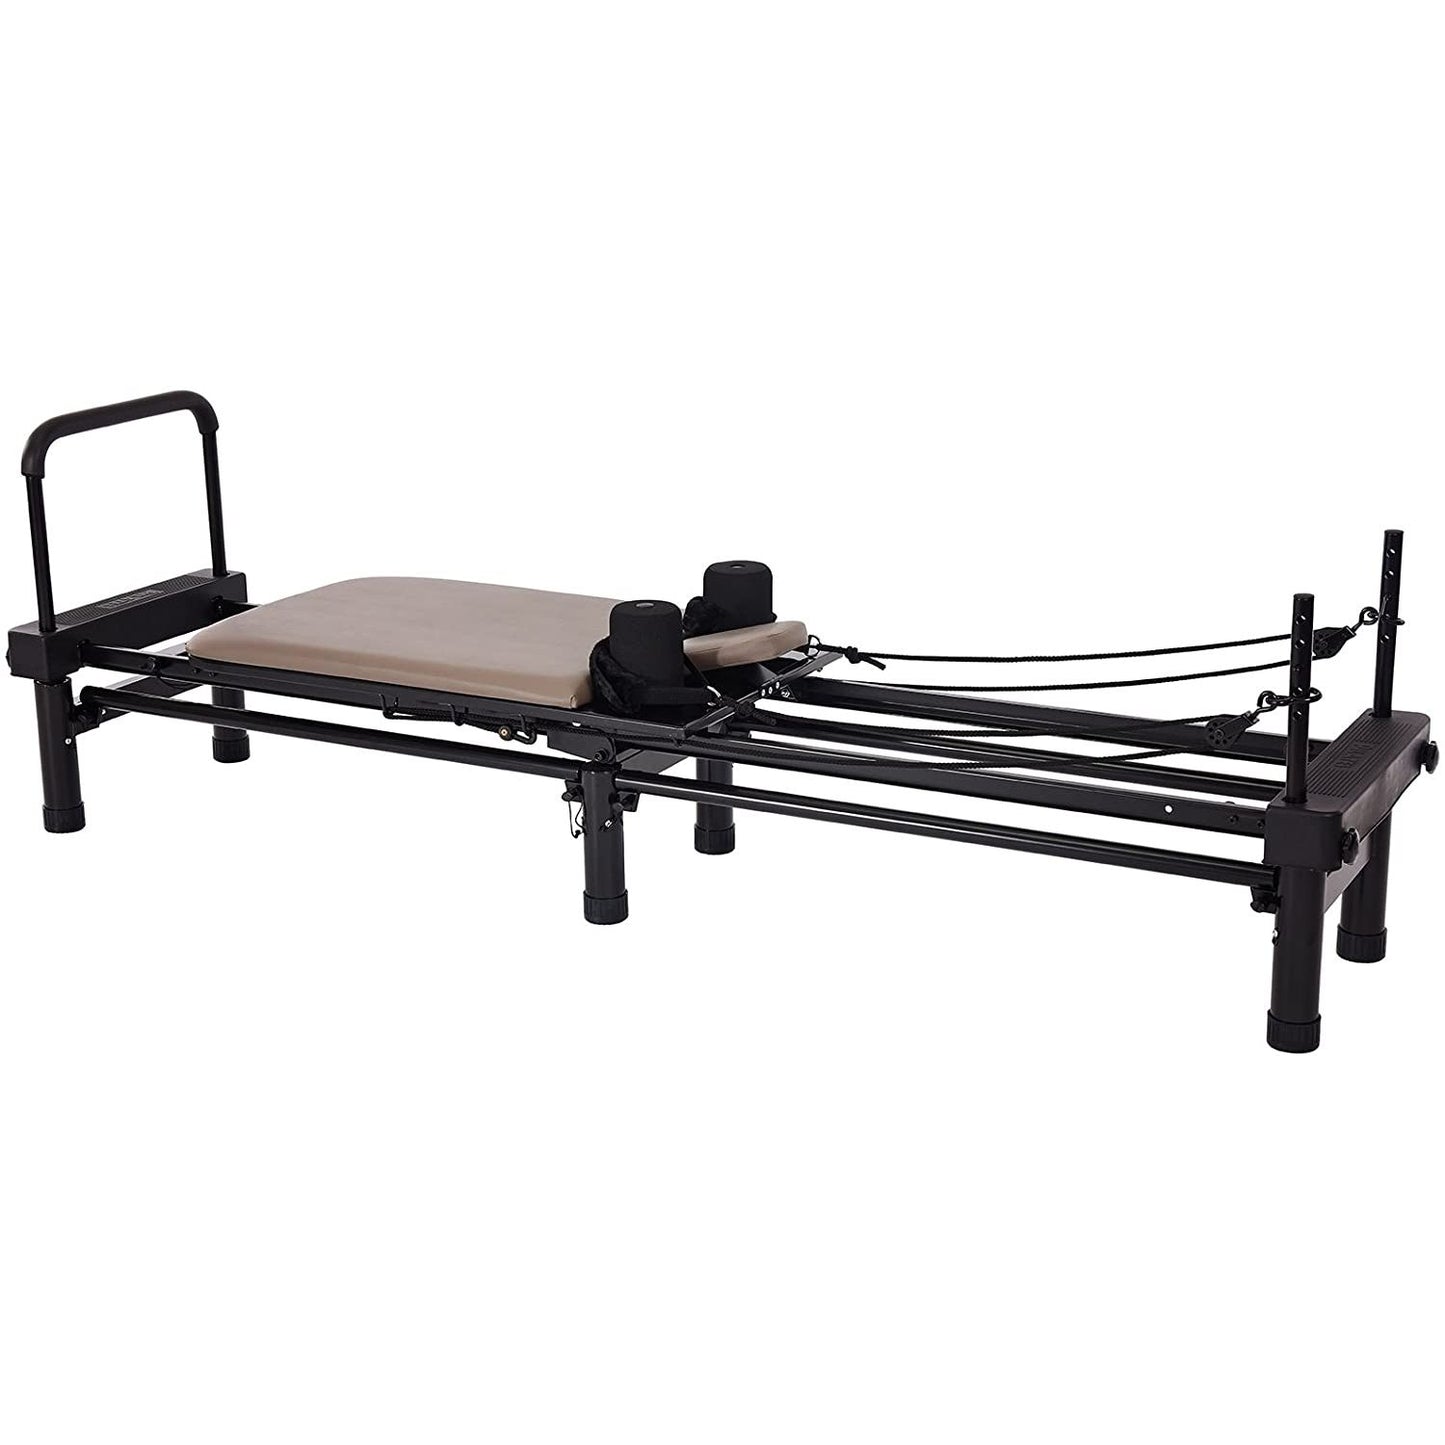 Buy AeroPilates Reformer 651 Online at Low Prices in India 